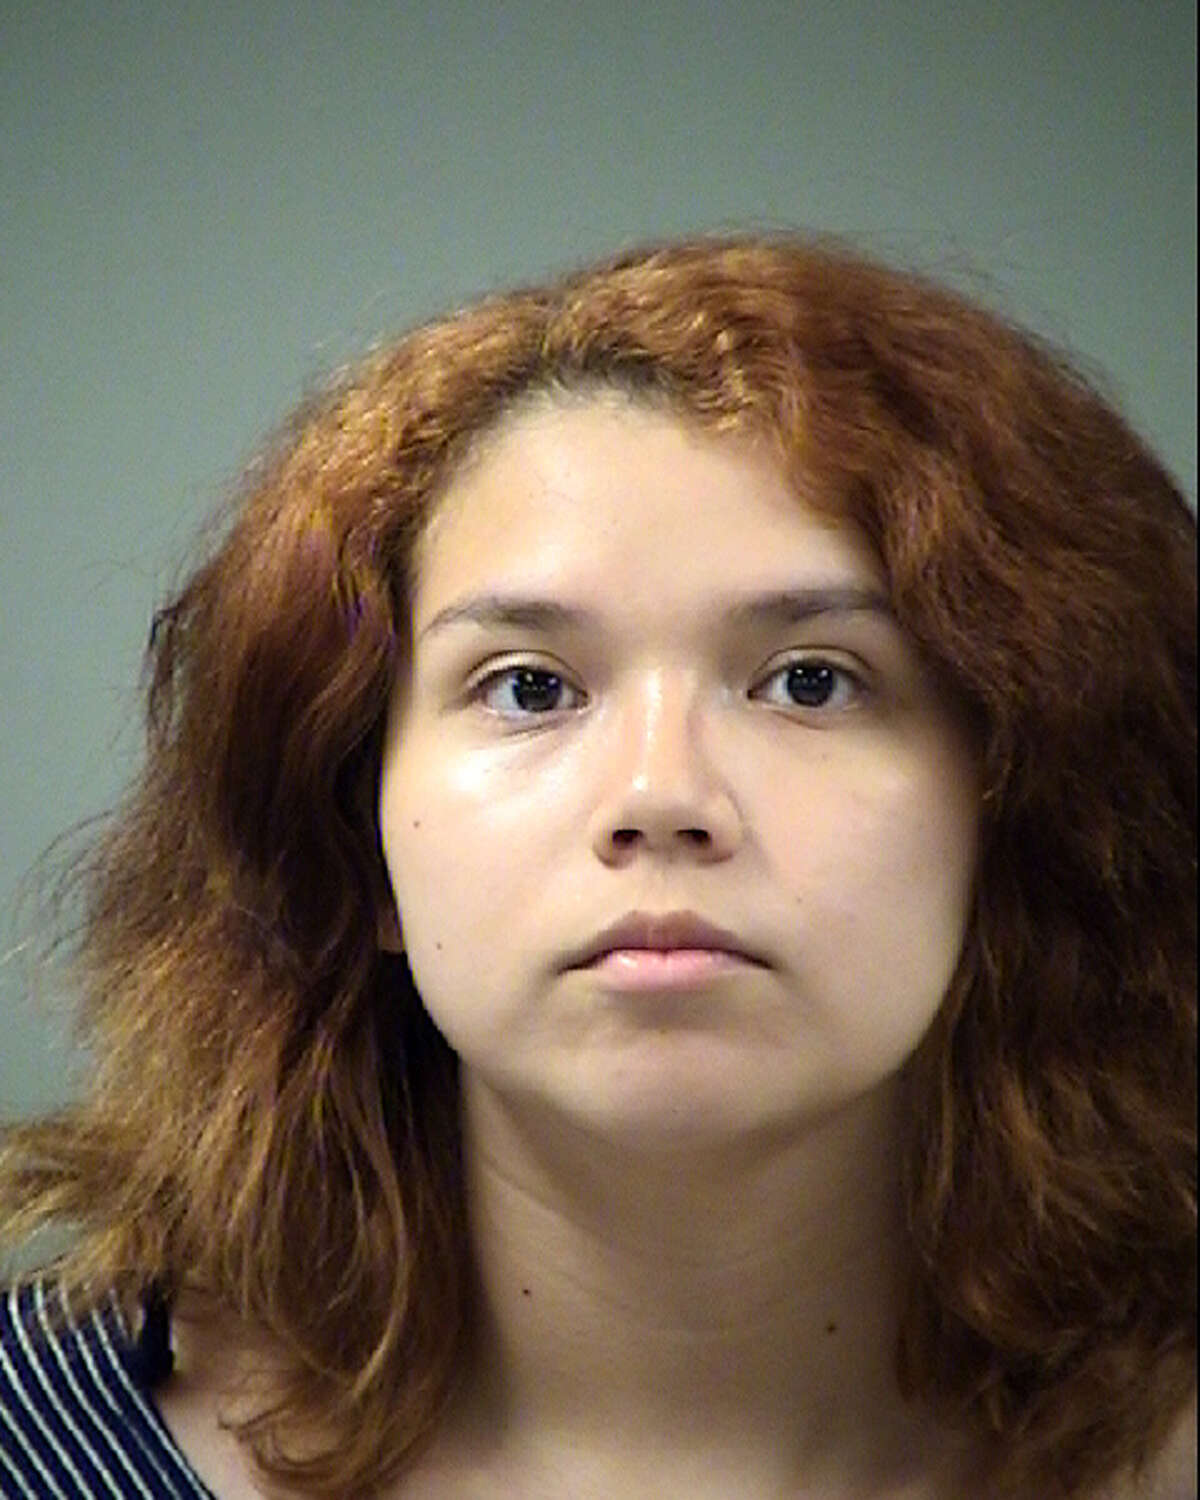 Israel Reyes now faces two charges of endangering a child and an arson charge. She was booked into the Bexar County Jail on a $30,000 bond.